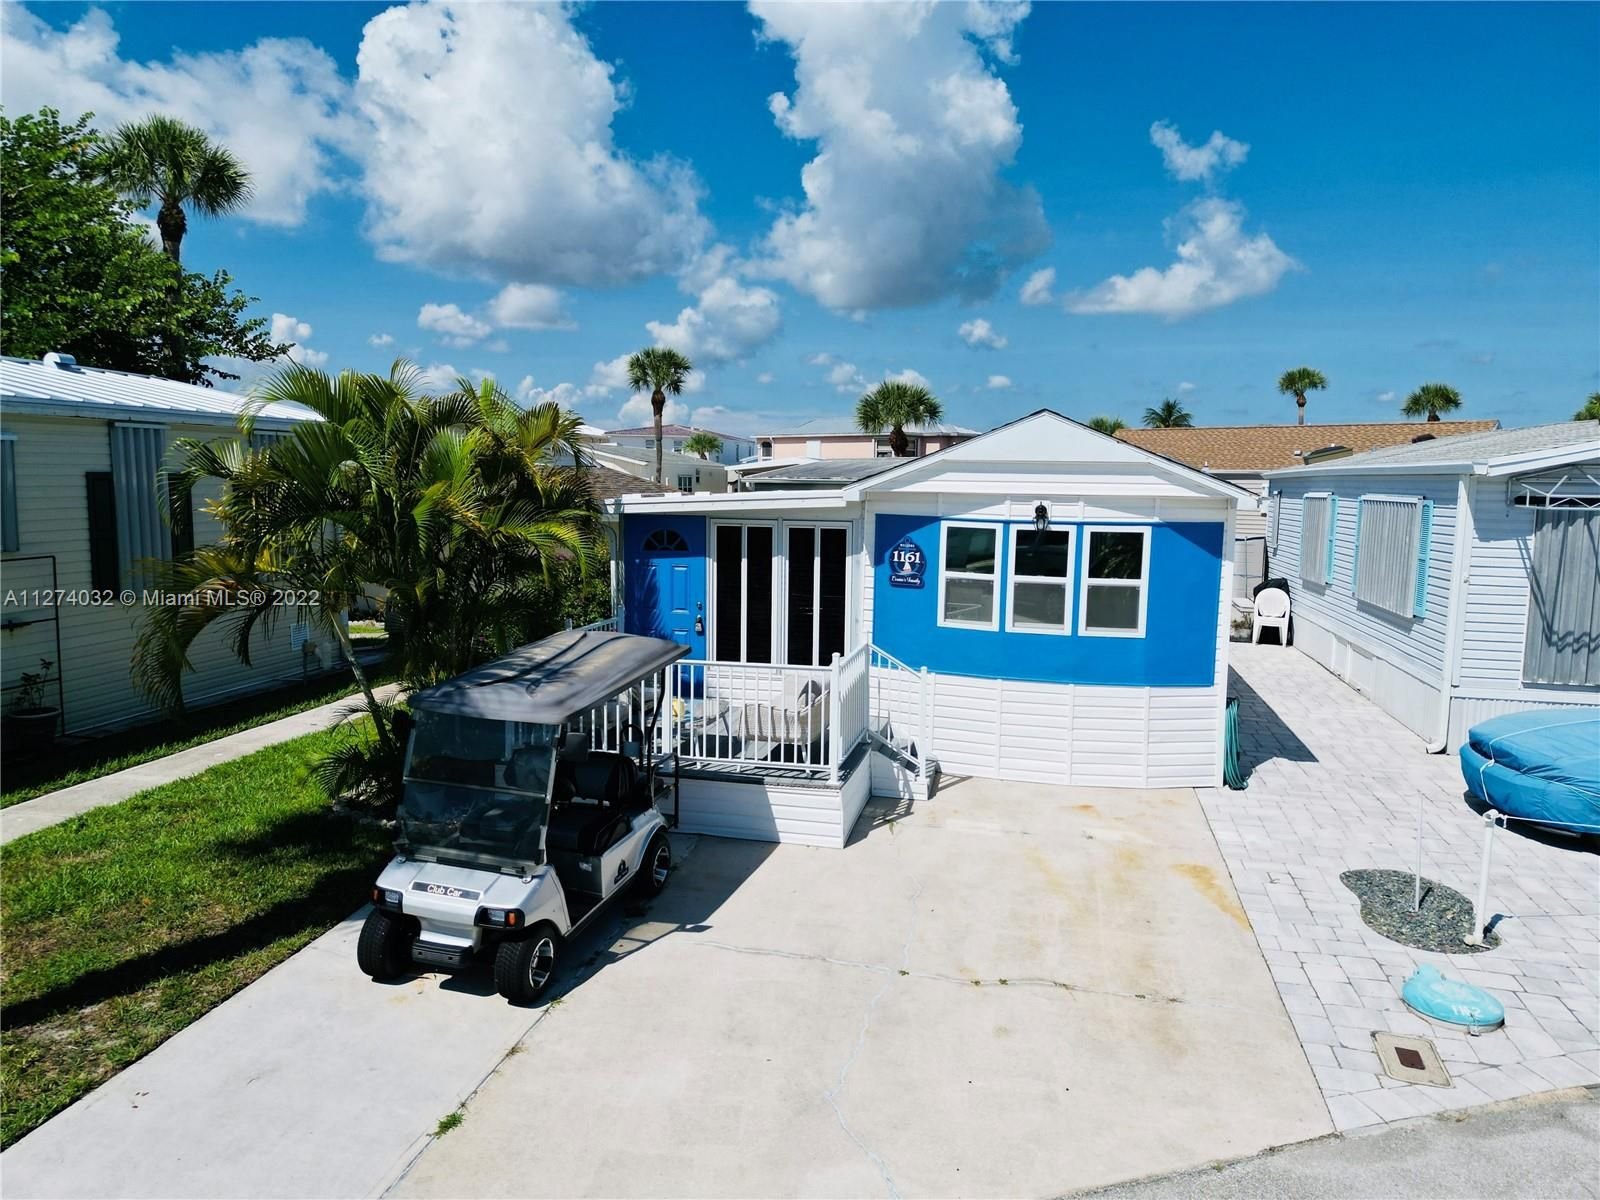 Real estate property located at 1161 Nettles Blvd, St Lucie County, Jensen Beach, FL